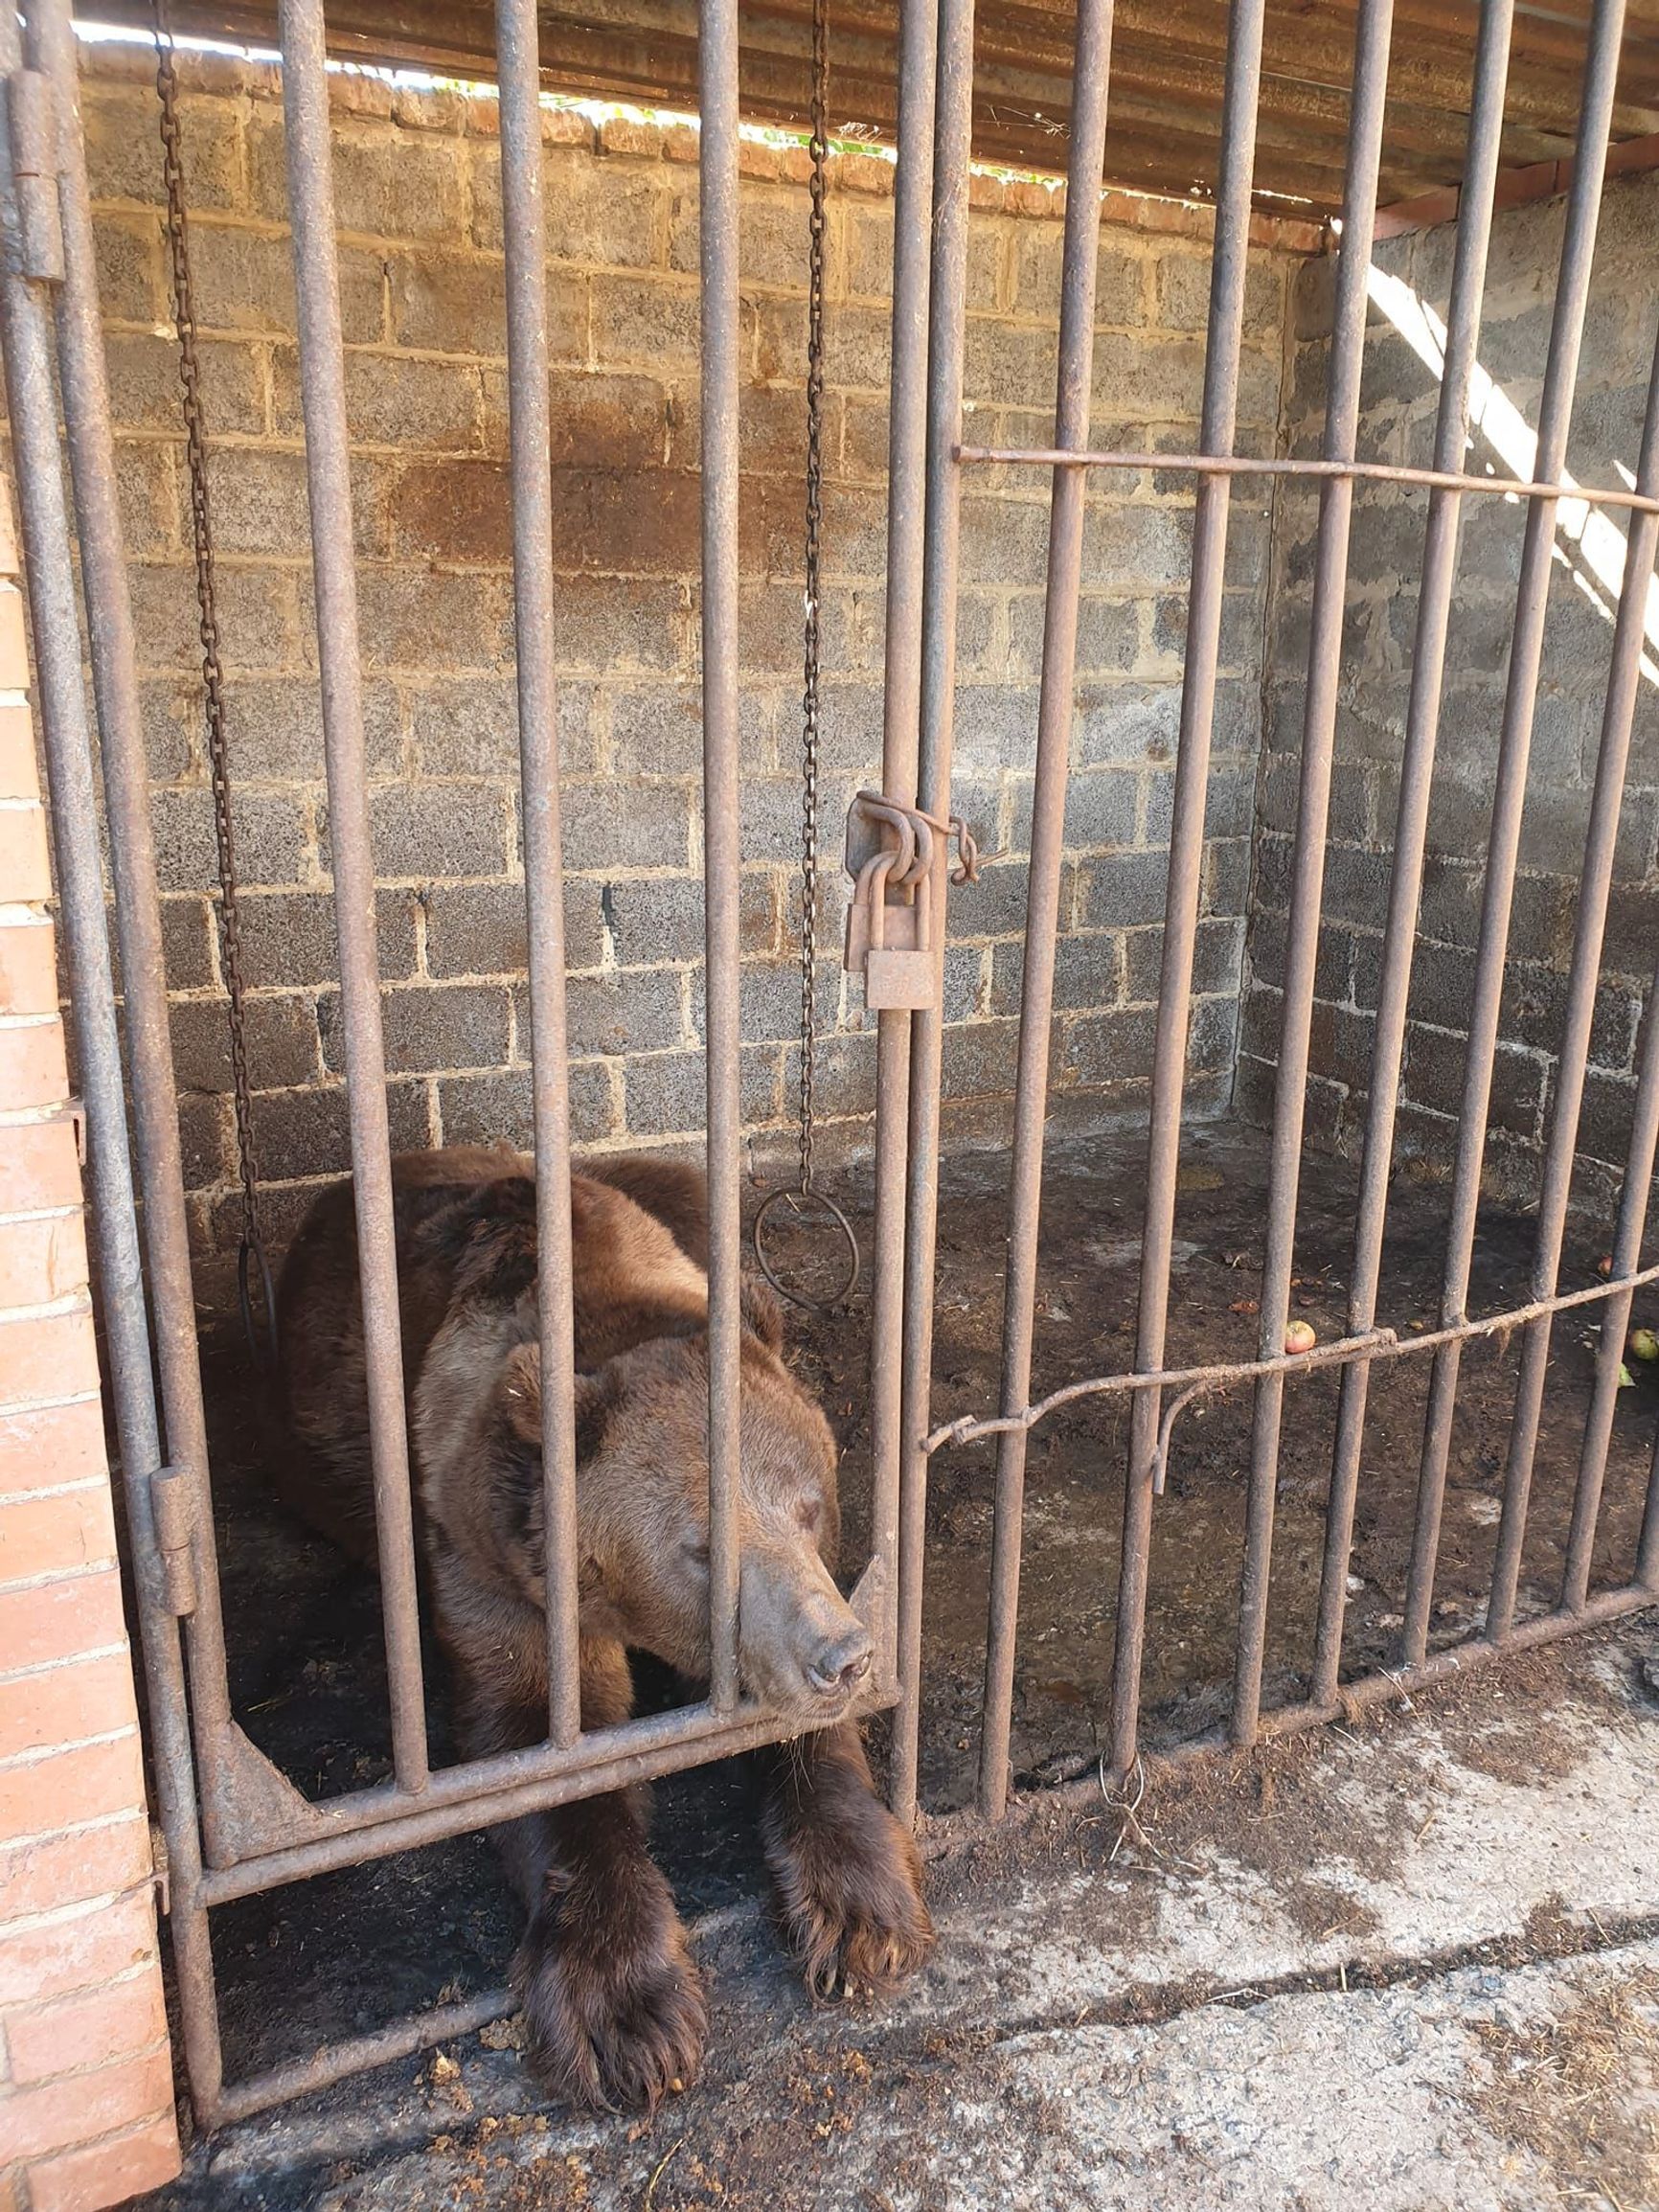 The enclosure of the bear in Bakhmut rescued by Natalia Popova